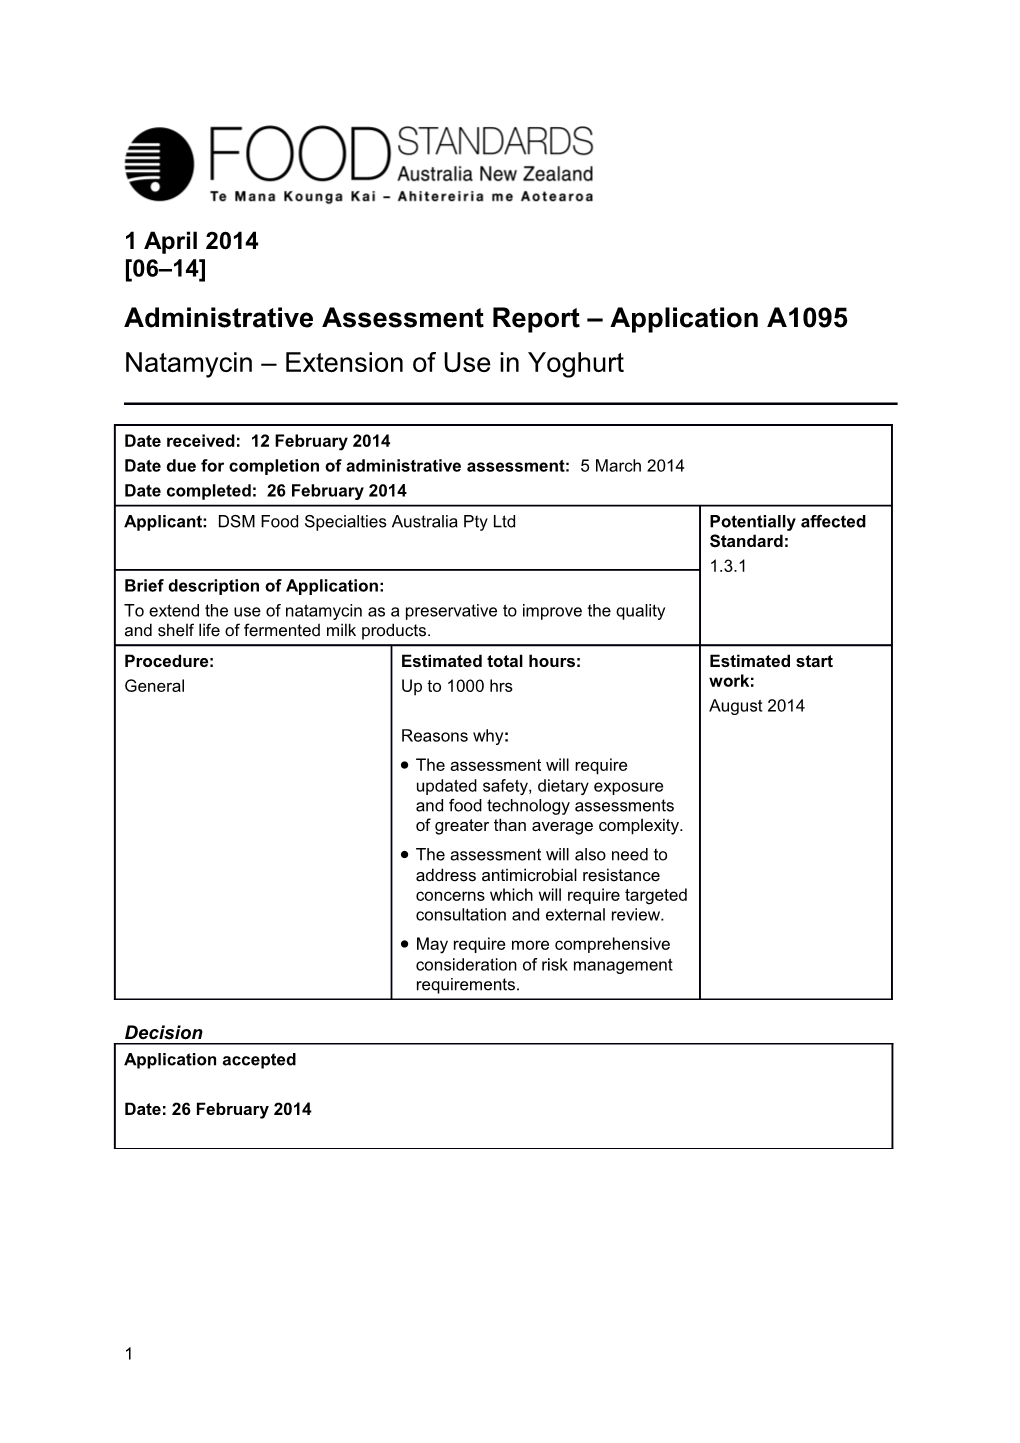 Administrative Assessment Report Application A1095